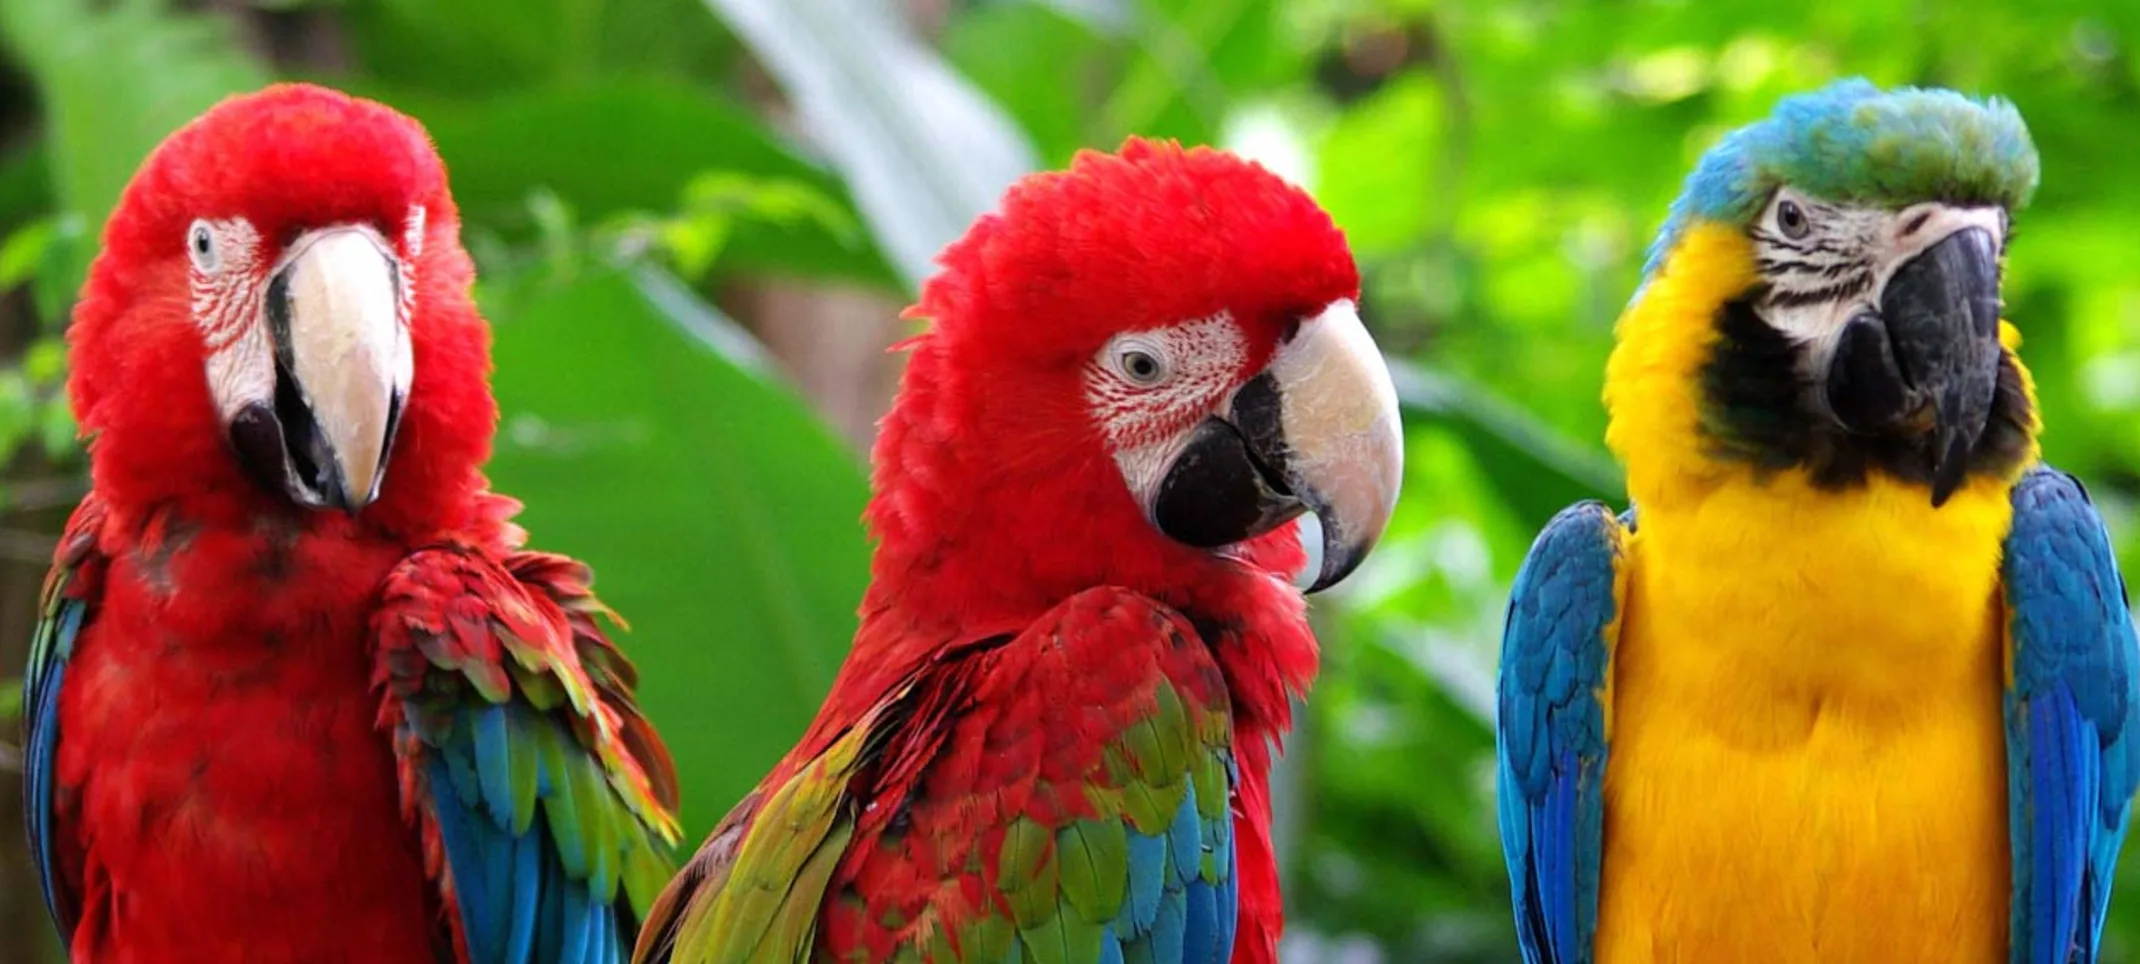 Three Parrots on a branch